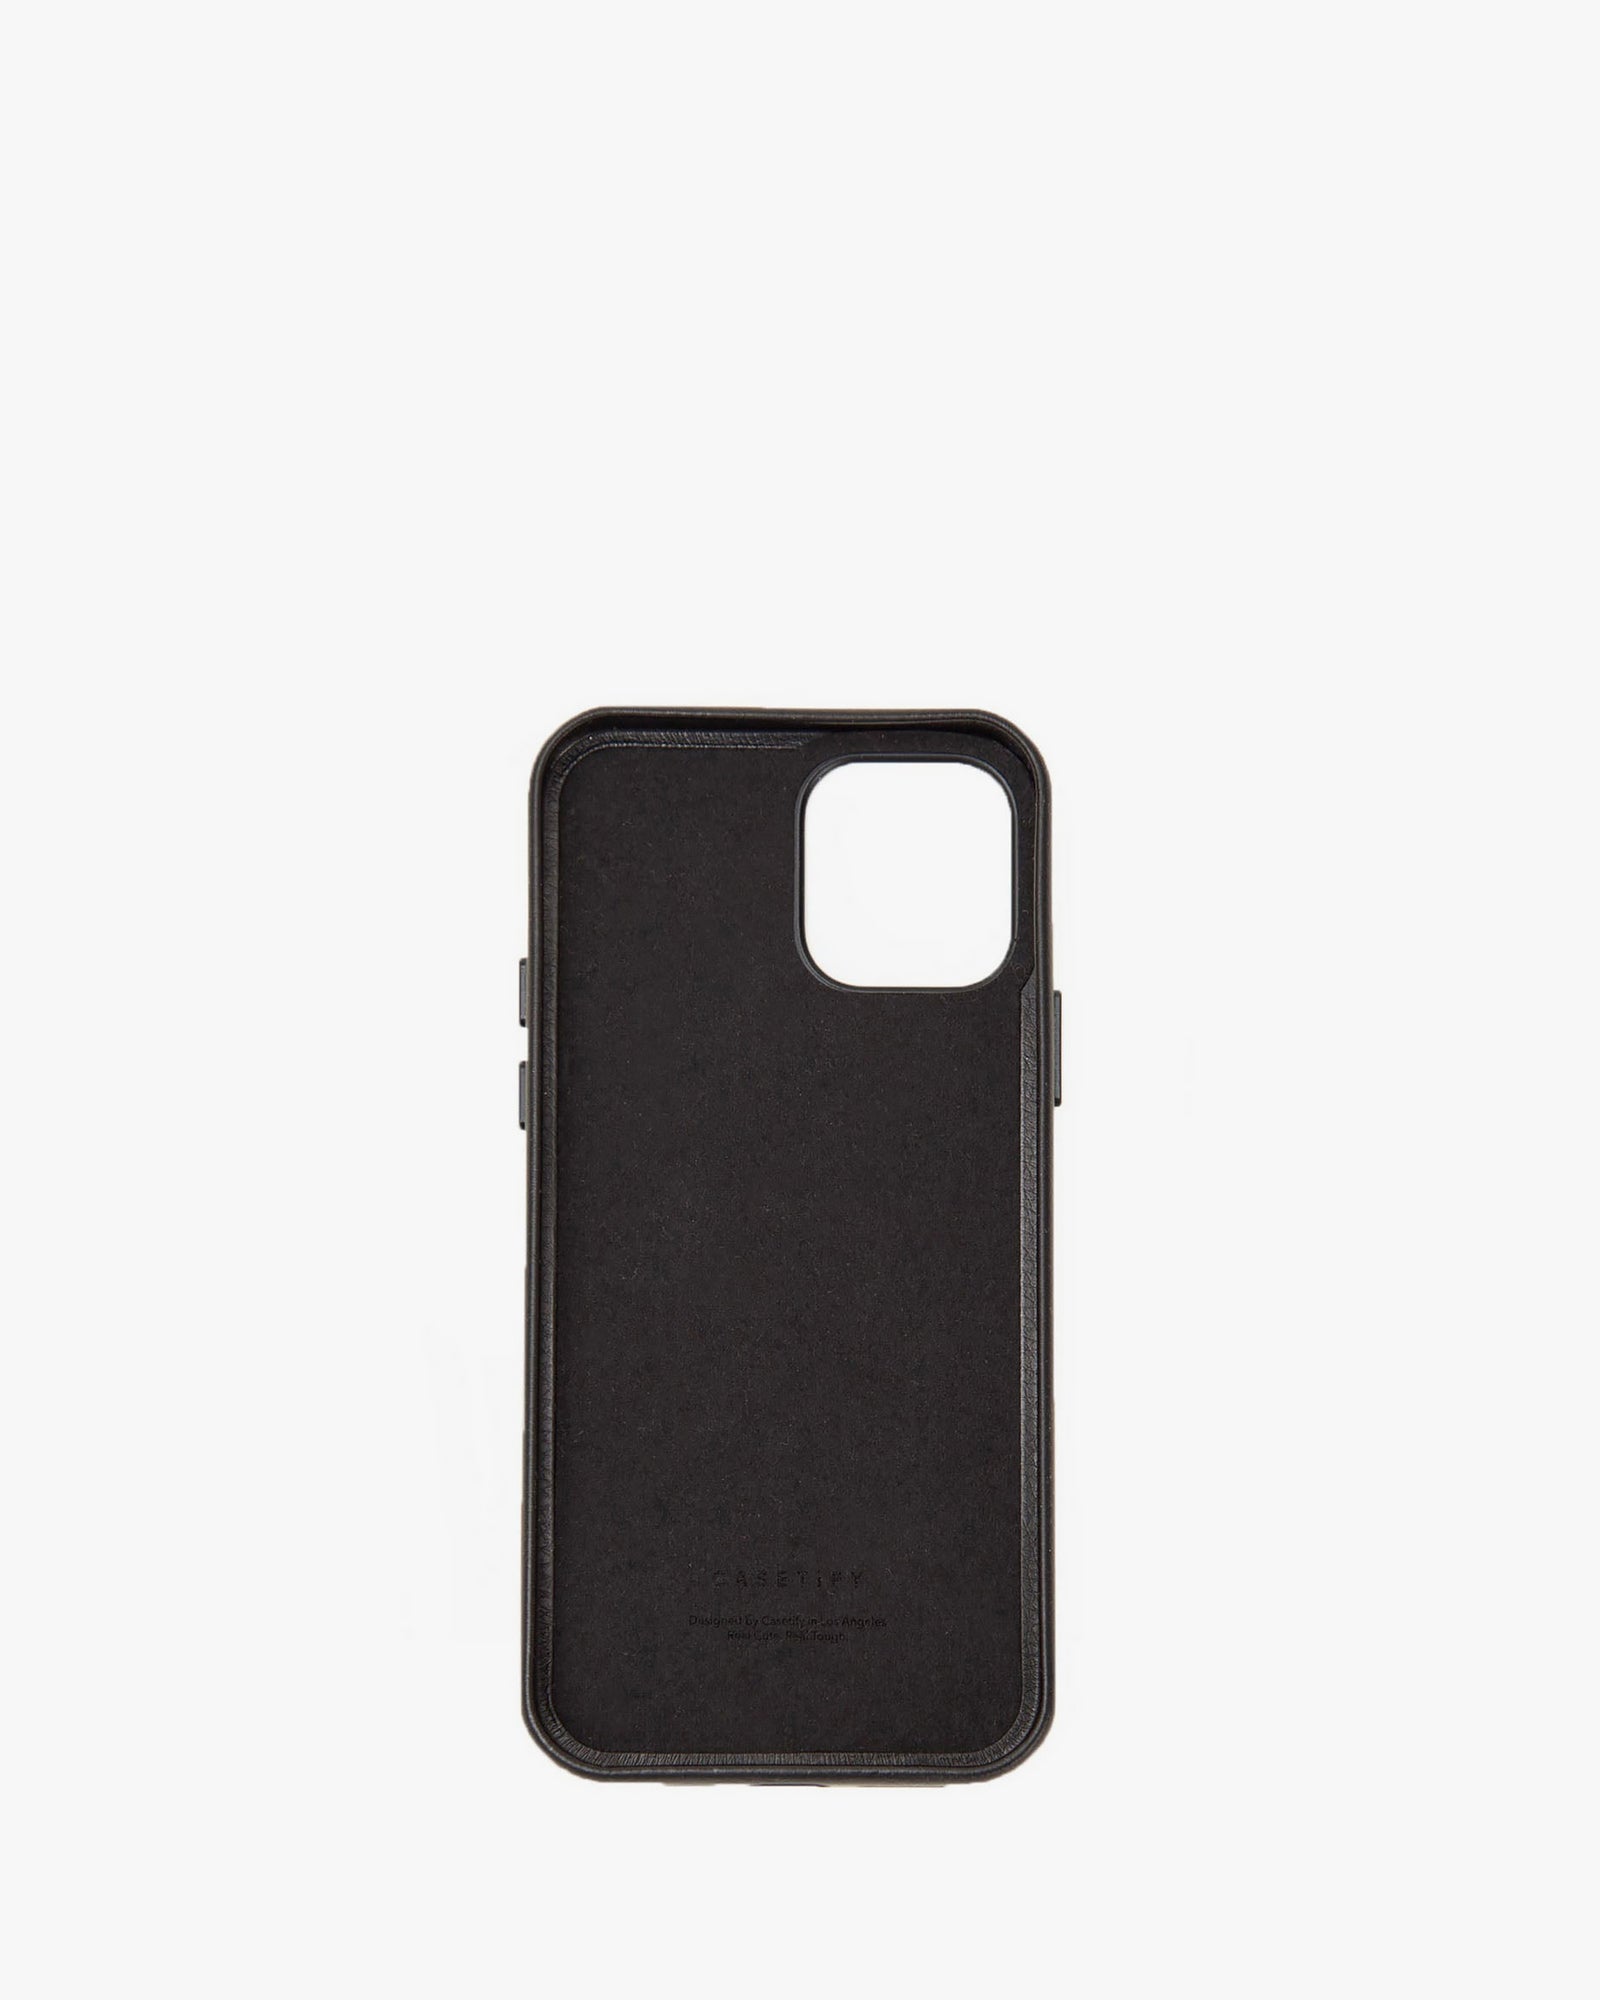 interior of the Black & Green Checker leather iphone case